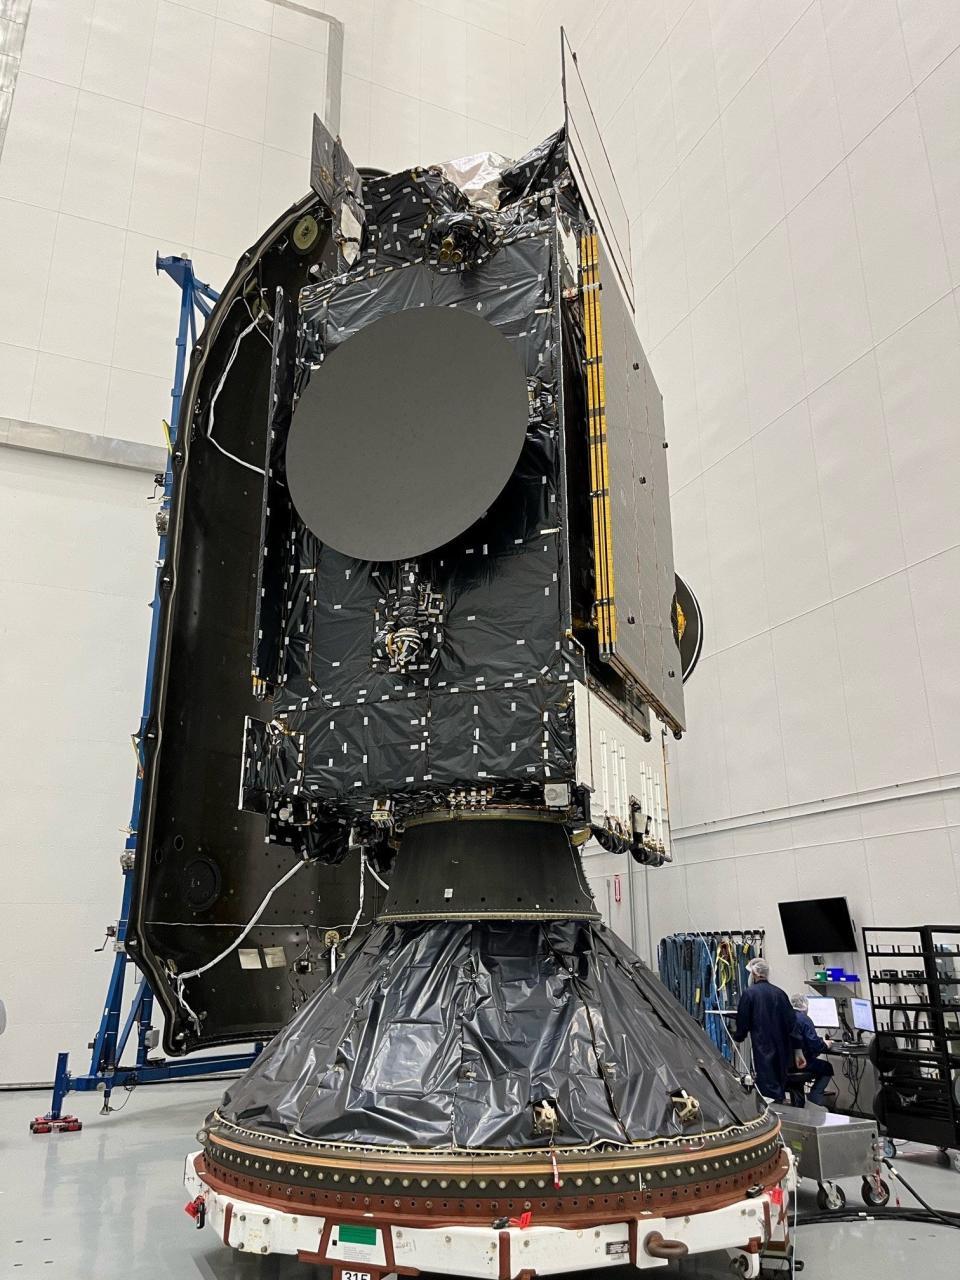 The Intelsat 40e satellite and its hosted pollution-monitoring NASA payload known as TEMPO is encapsulated into the payload fairings of a SpaceX Falcon 9 rocket ahead of launch vehicle integration.